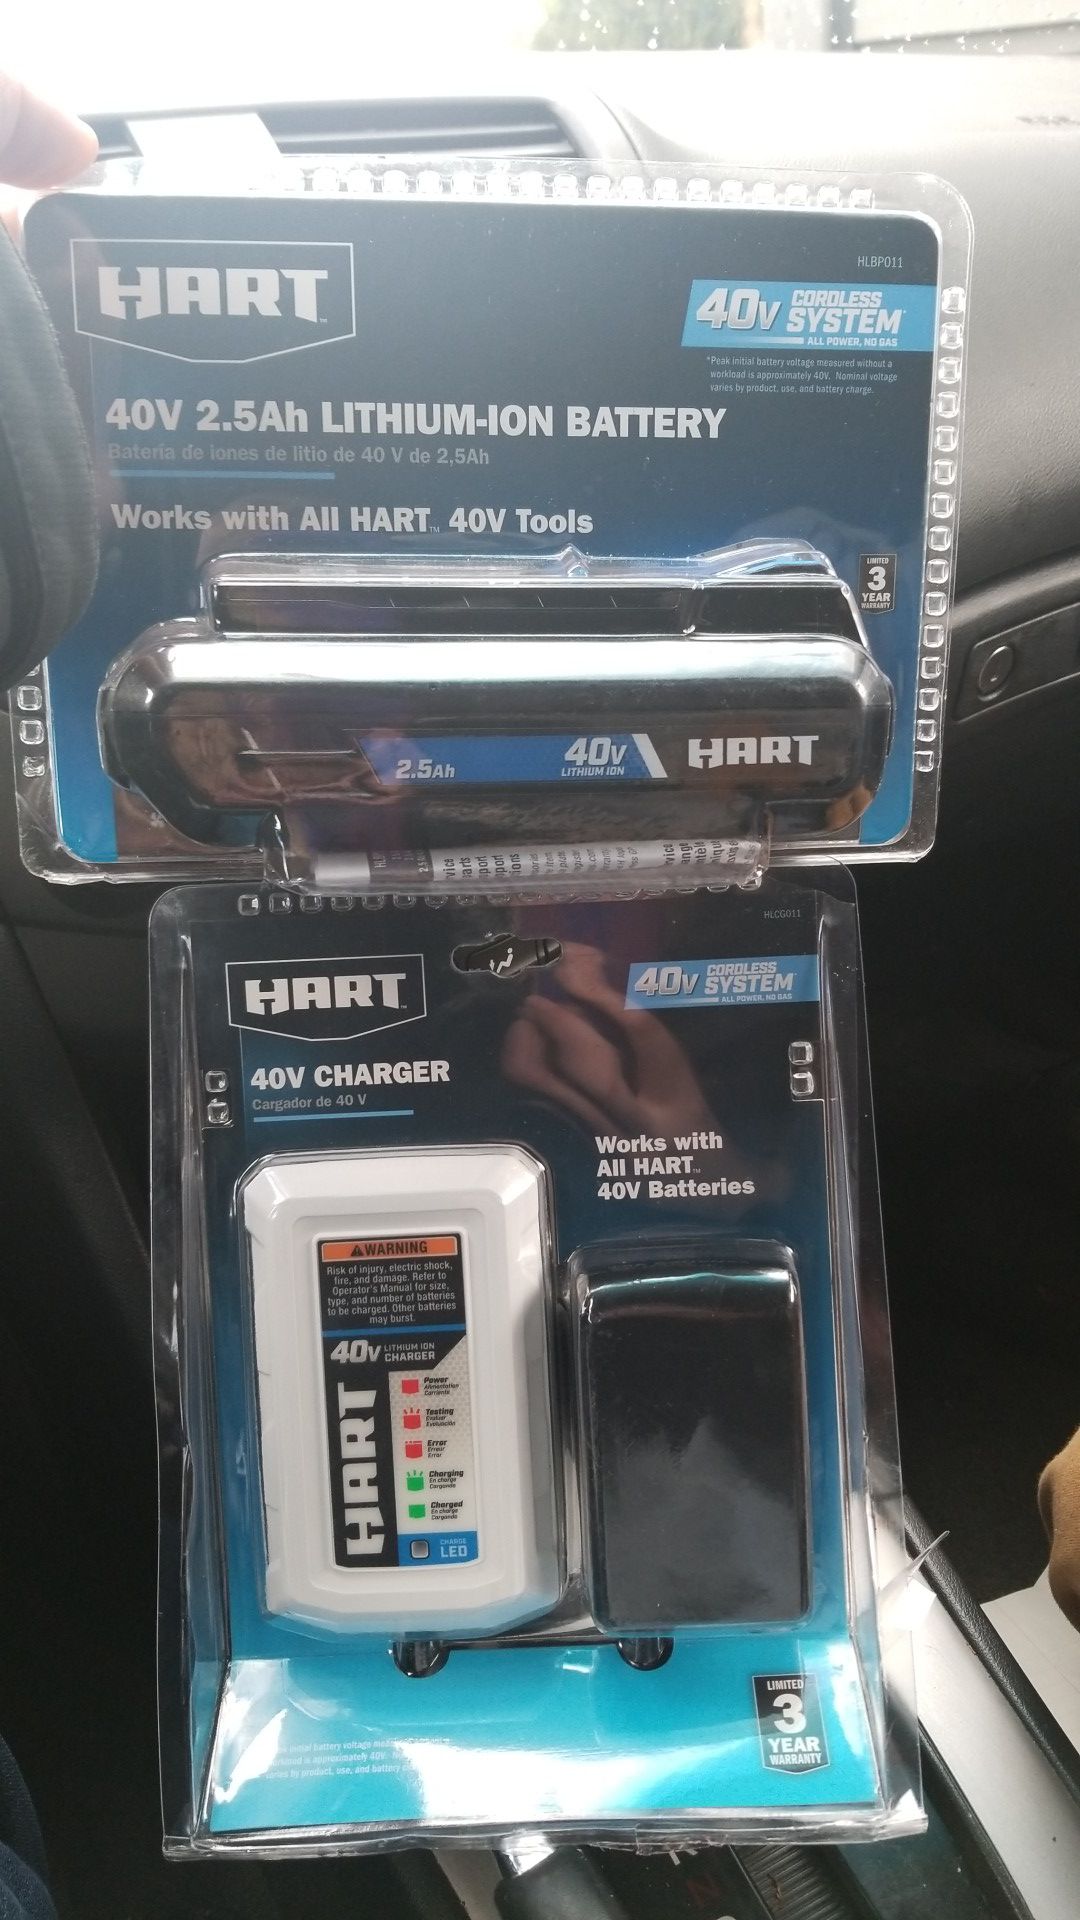 Hart 40v battery and charger